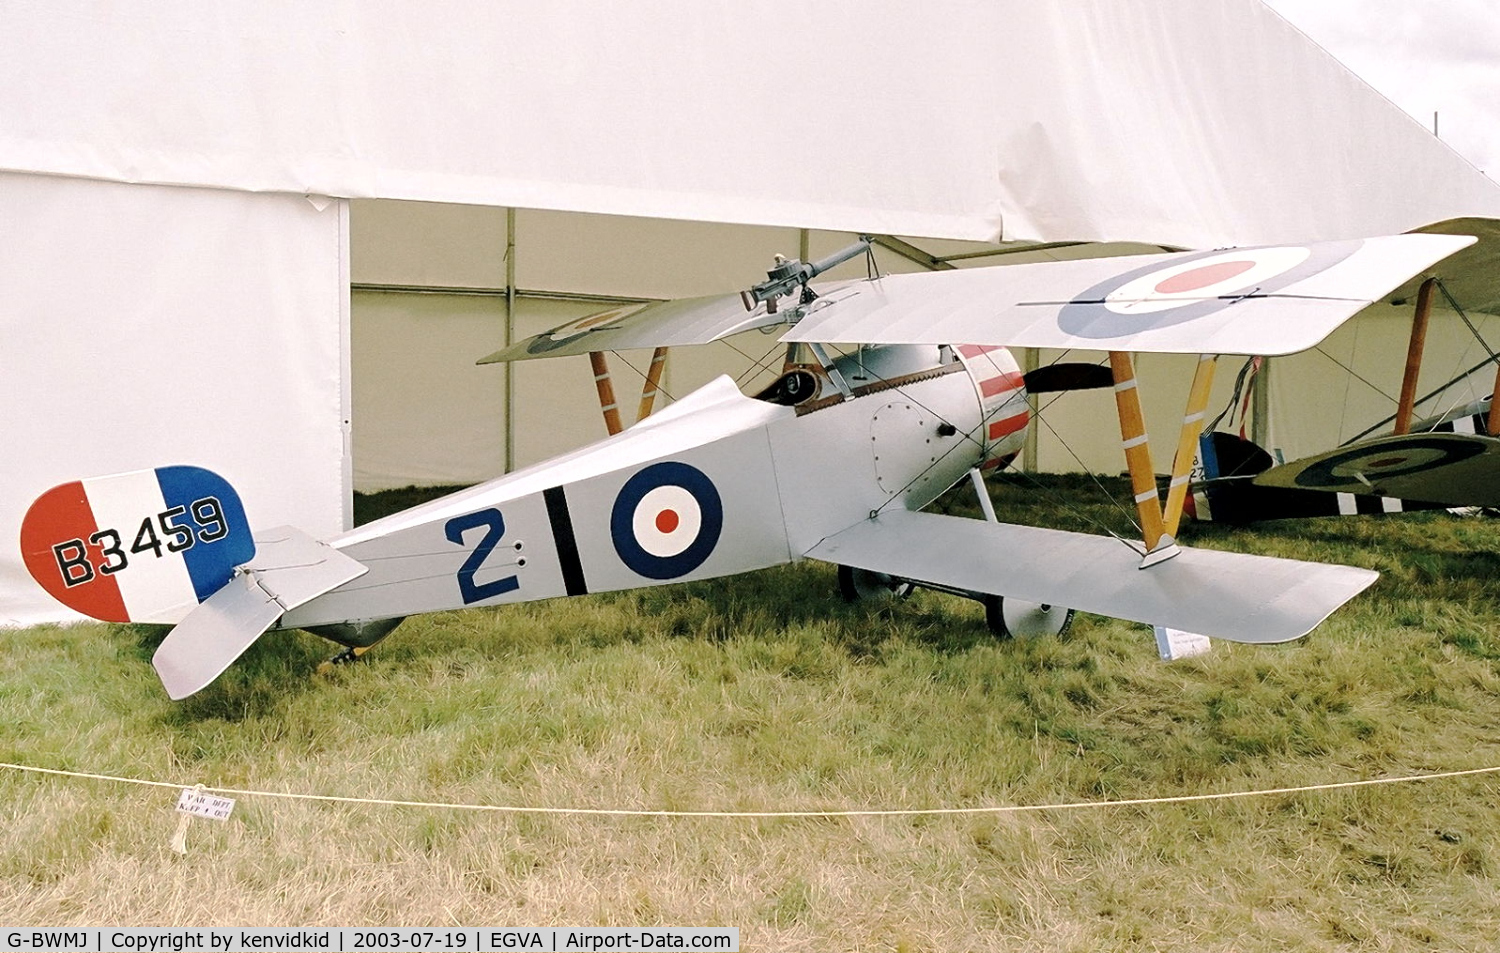 G-BWMJ, 1981 Nieuport 17 Scout Replica C/N PFA 121-12351, In the 100 Years of Flight enclave at RIAT.